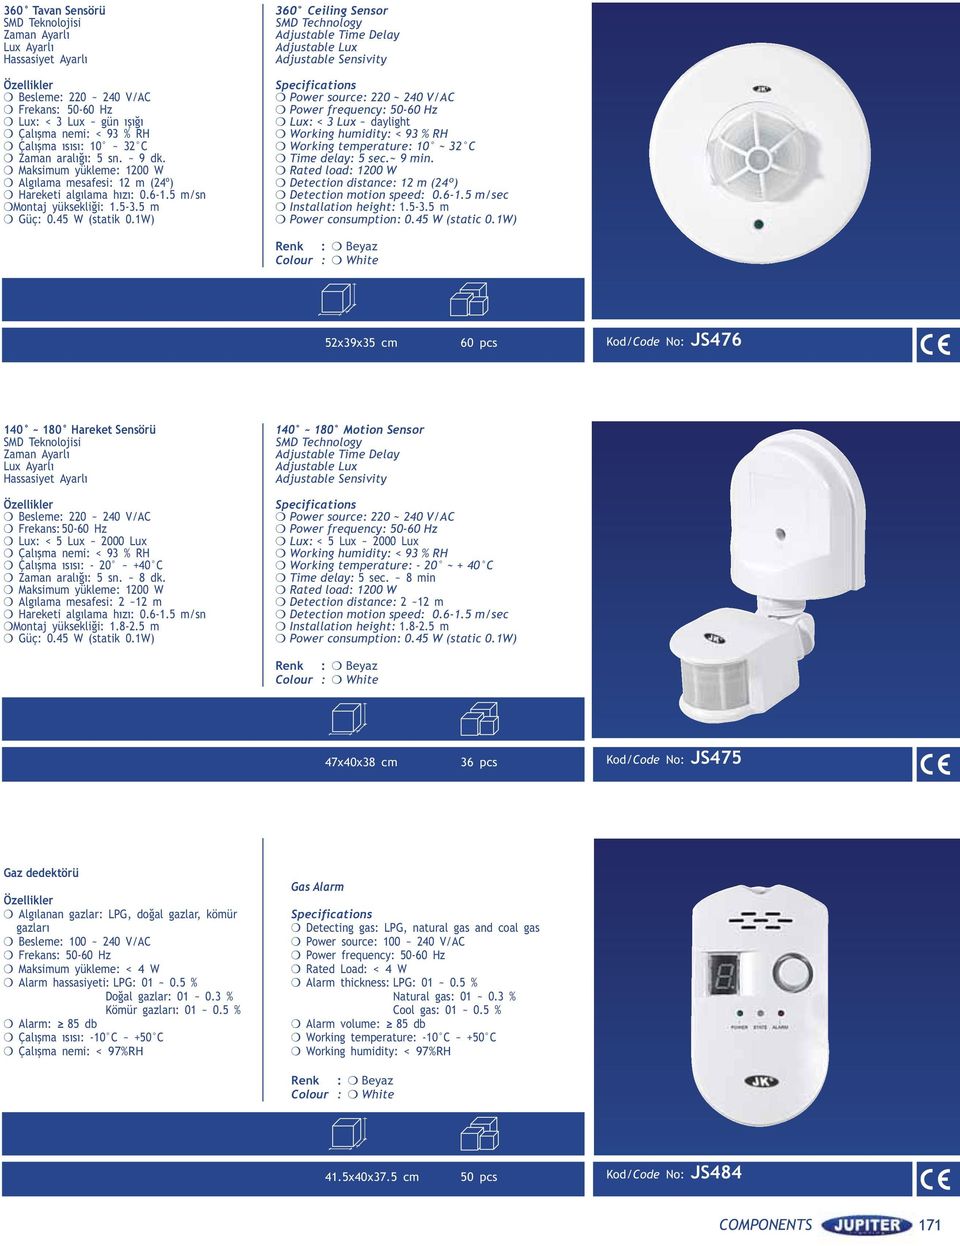 1) 360 Ceiling Sensor SMD Technology Adjustable Time Delay Adjustable Lux Adjustable Sensivity Specifications Power source: 220 ~ 240 /AC Power frequency: 50-60 Hz Lux: < 3 Lux ~ daylight orking